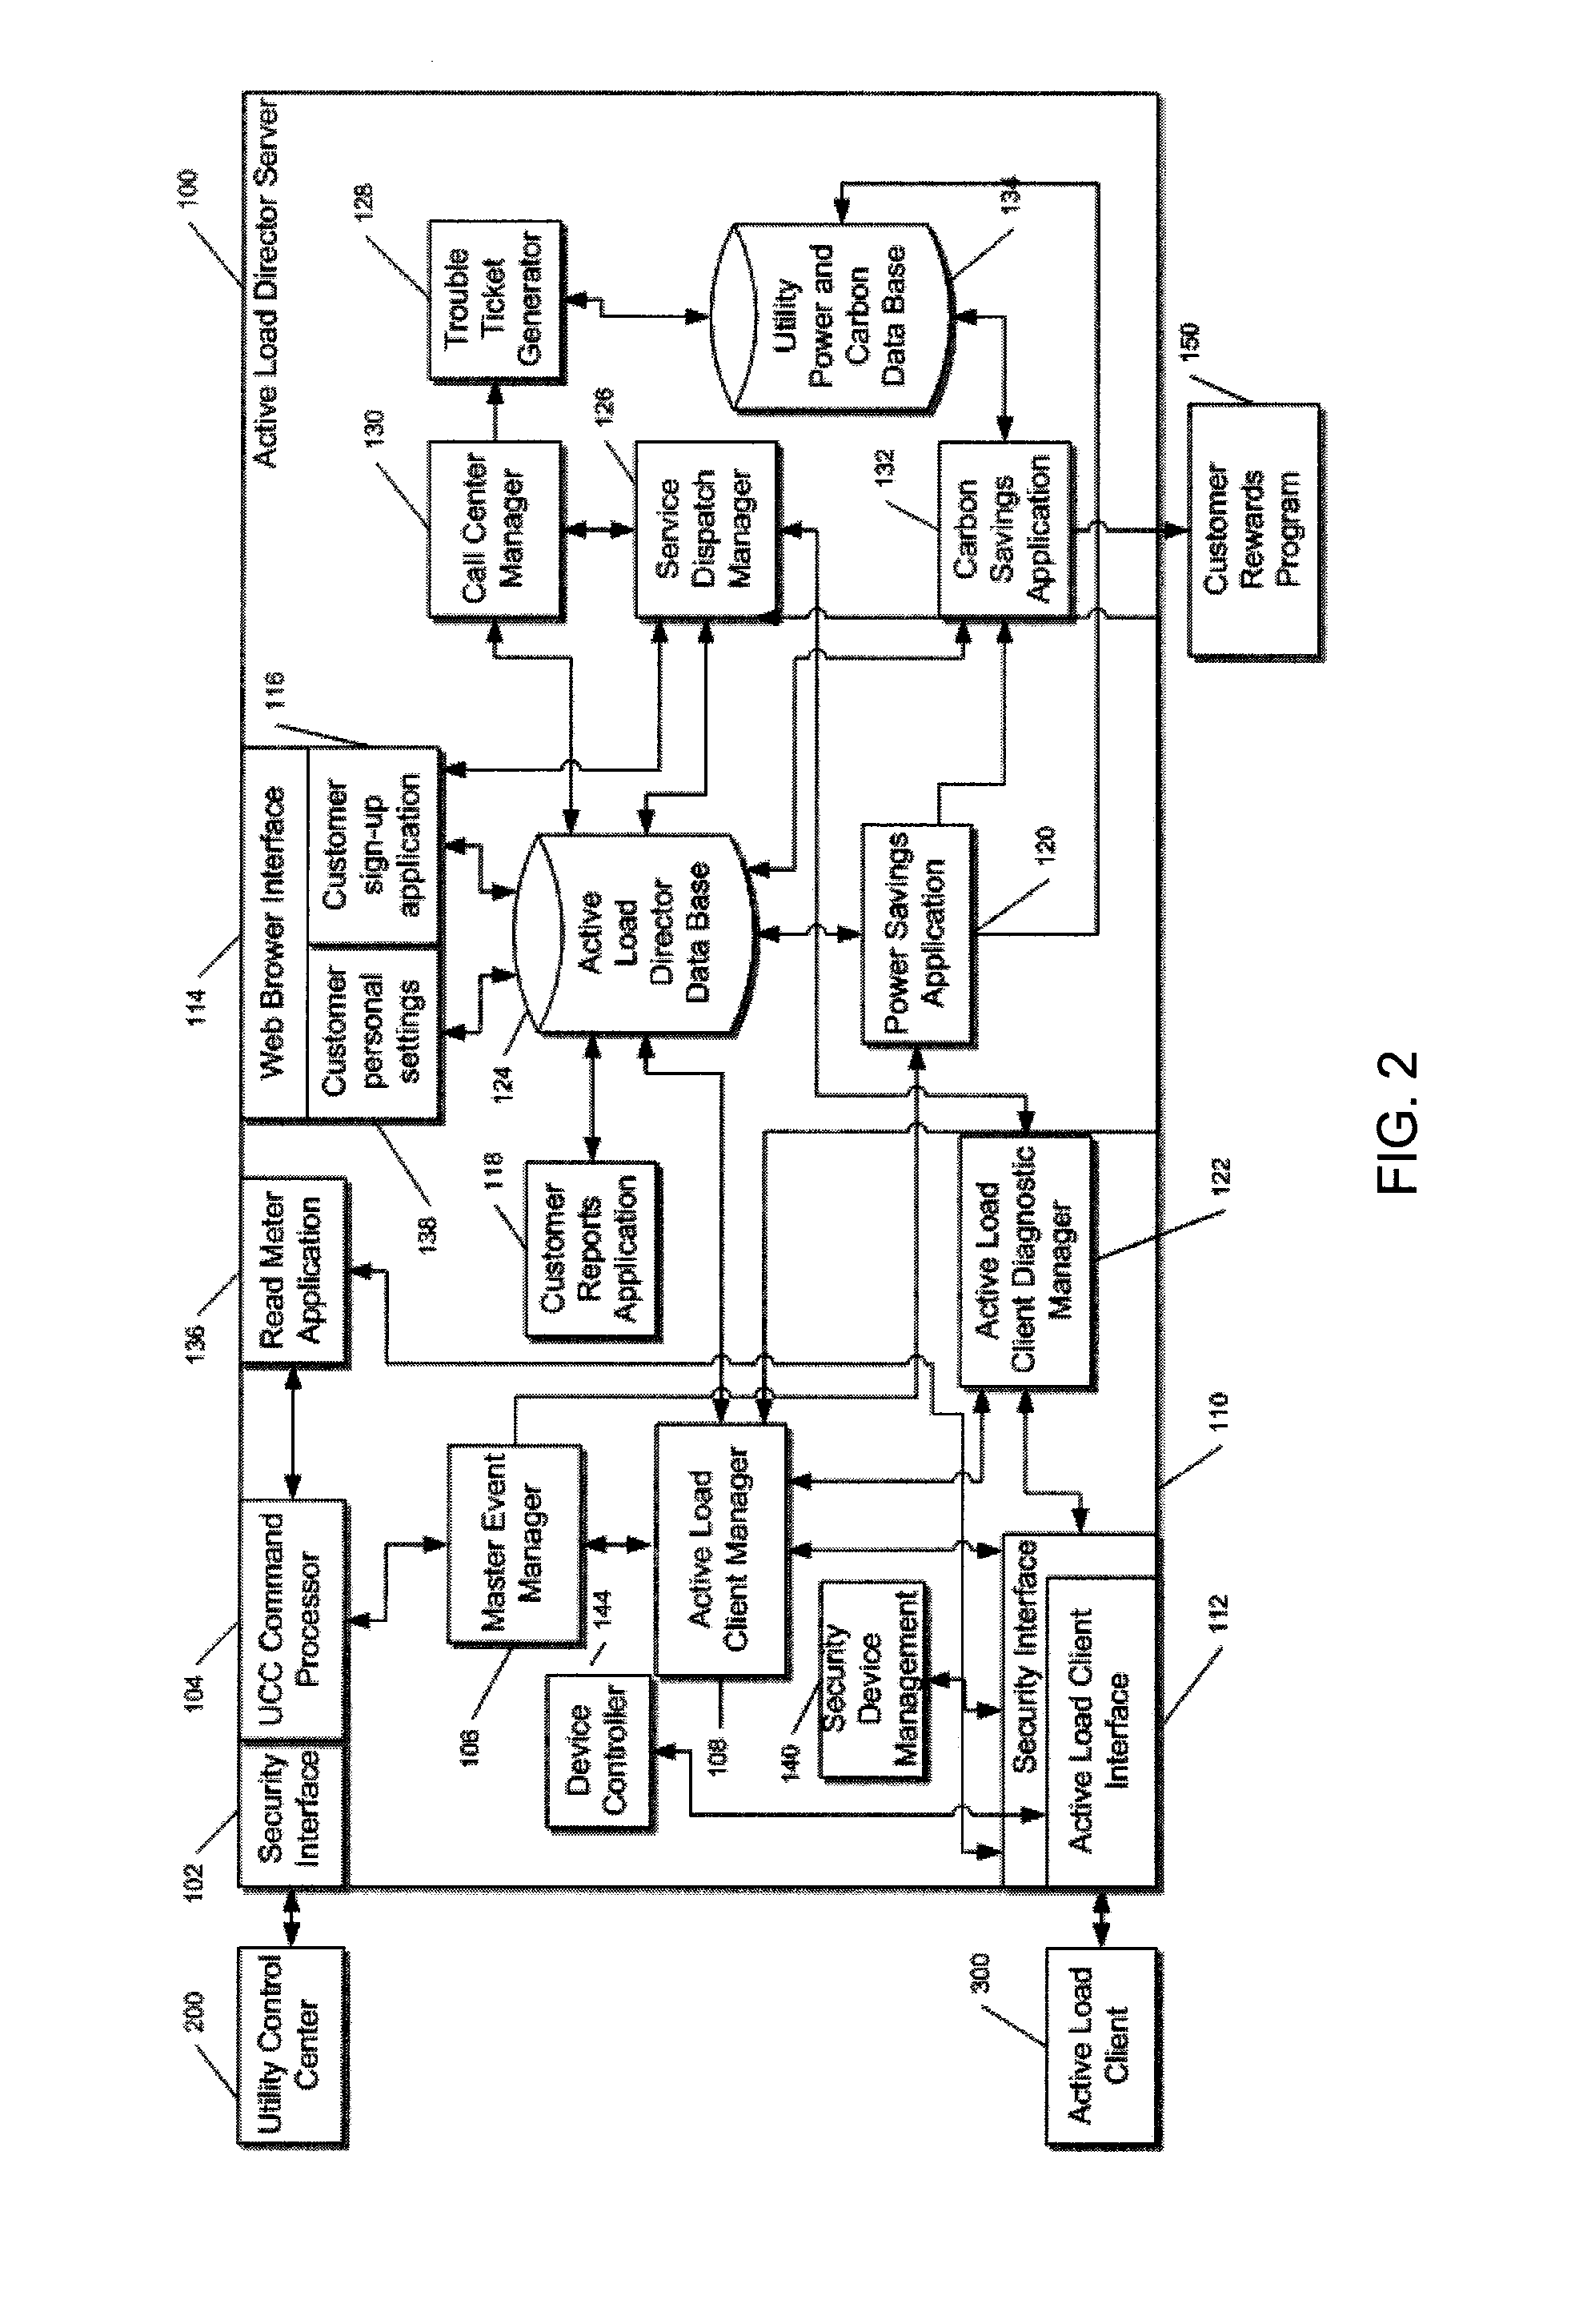 System and method for priority delivery of load management messages on ip-based networks